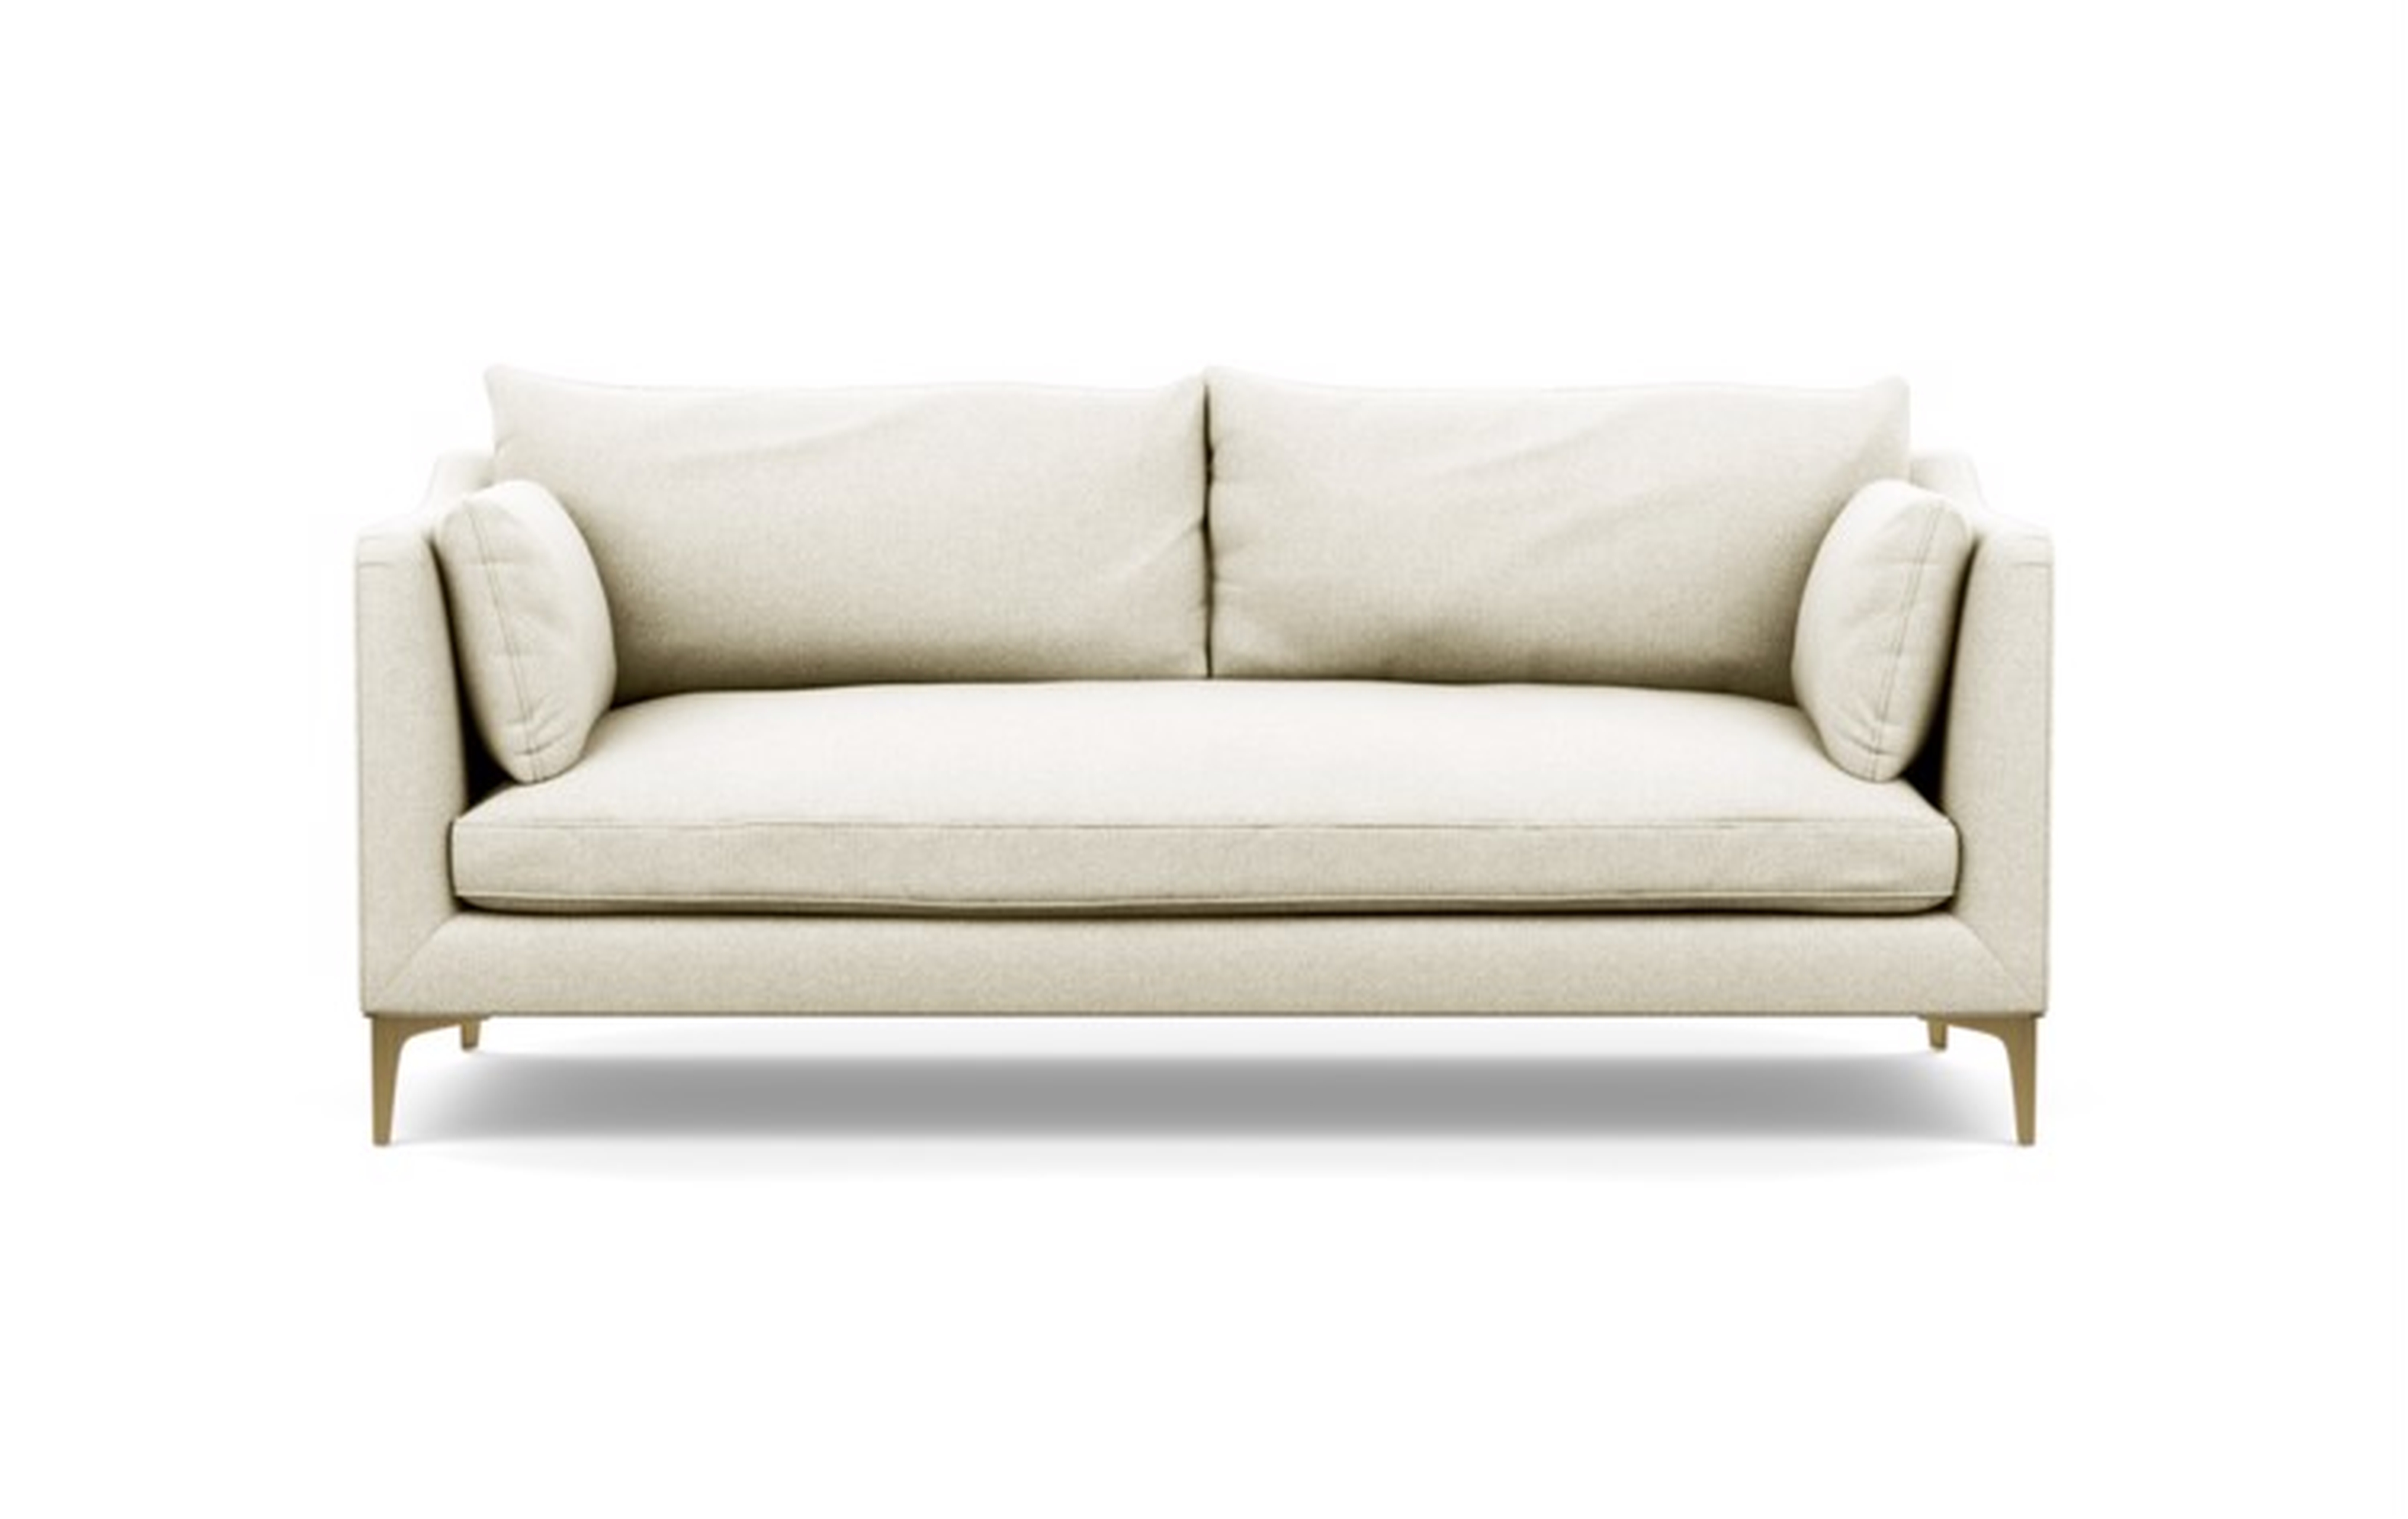 Caitlin by The Everygirl Sofa in Vanilla Fabric with Brass Plated legs - Interior Define